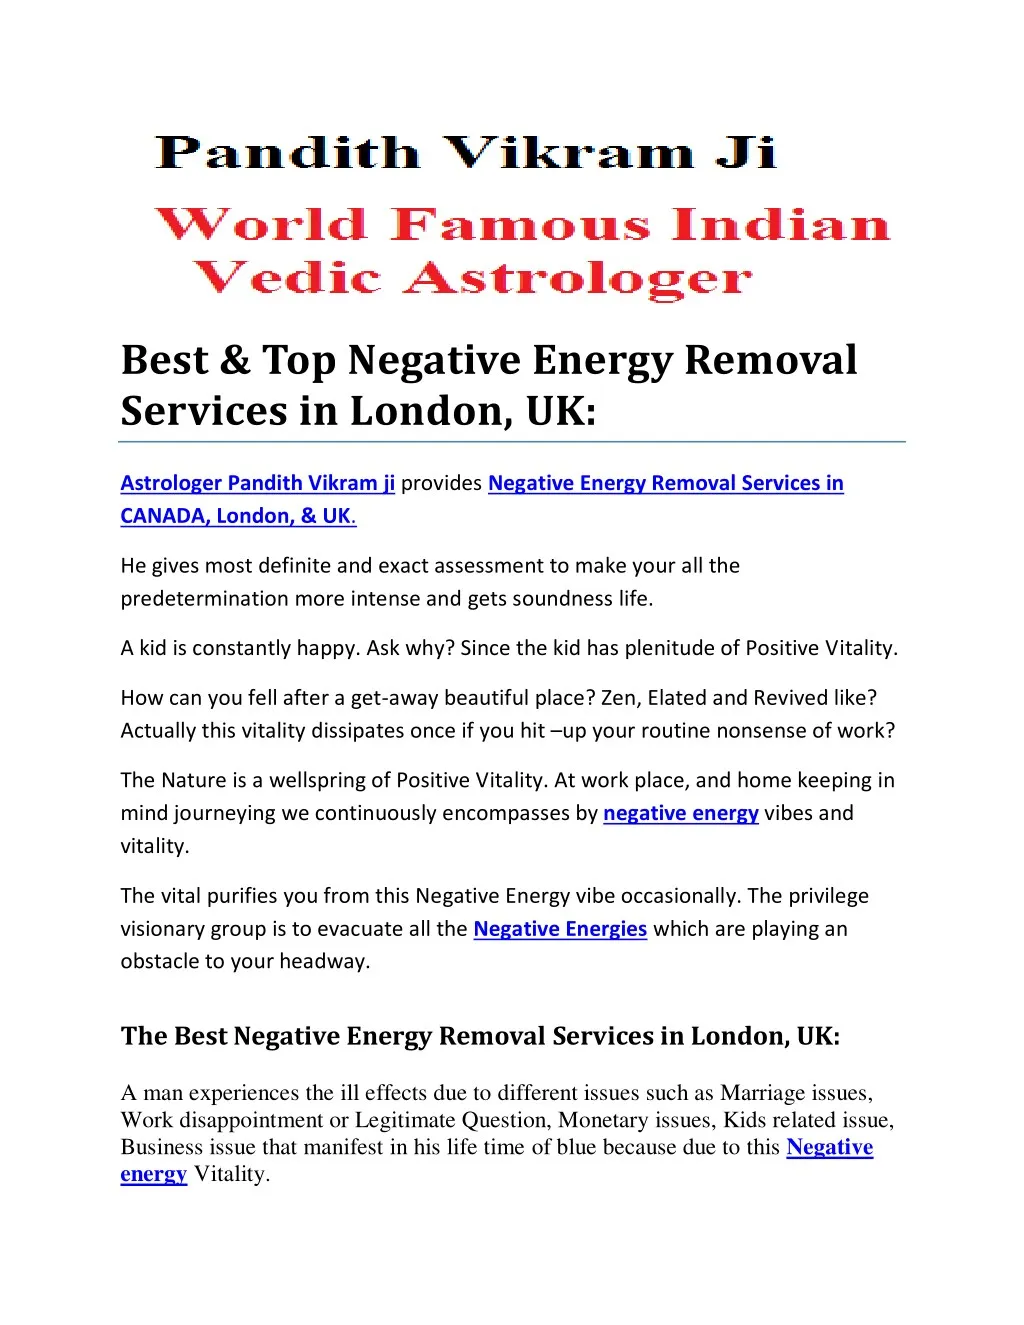 best top negative energy removal services